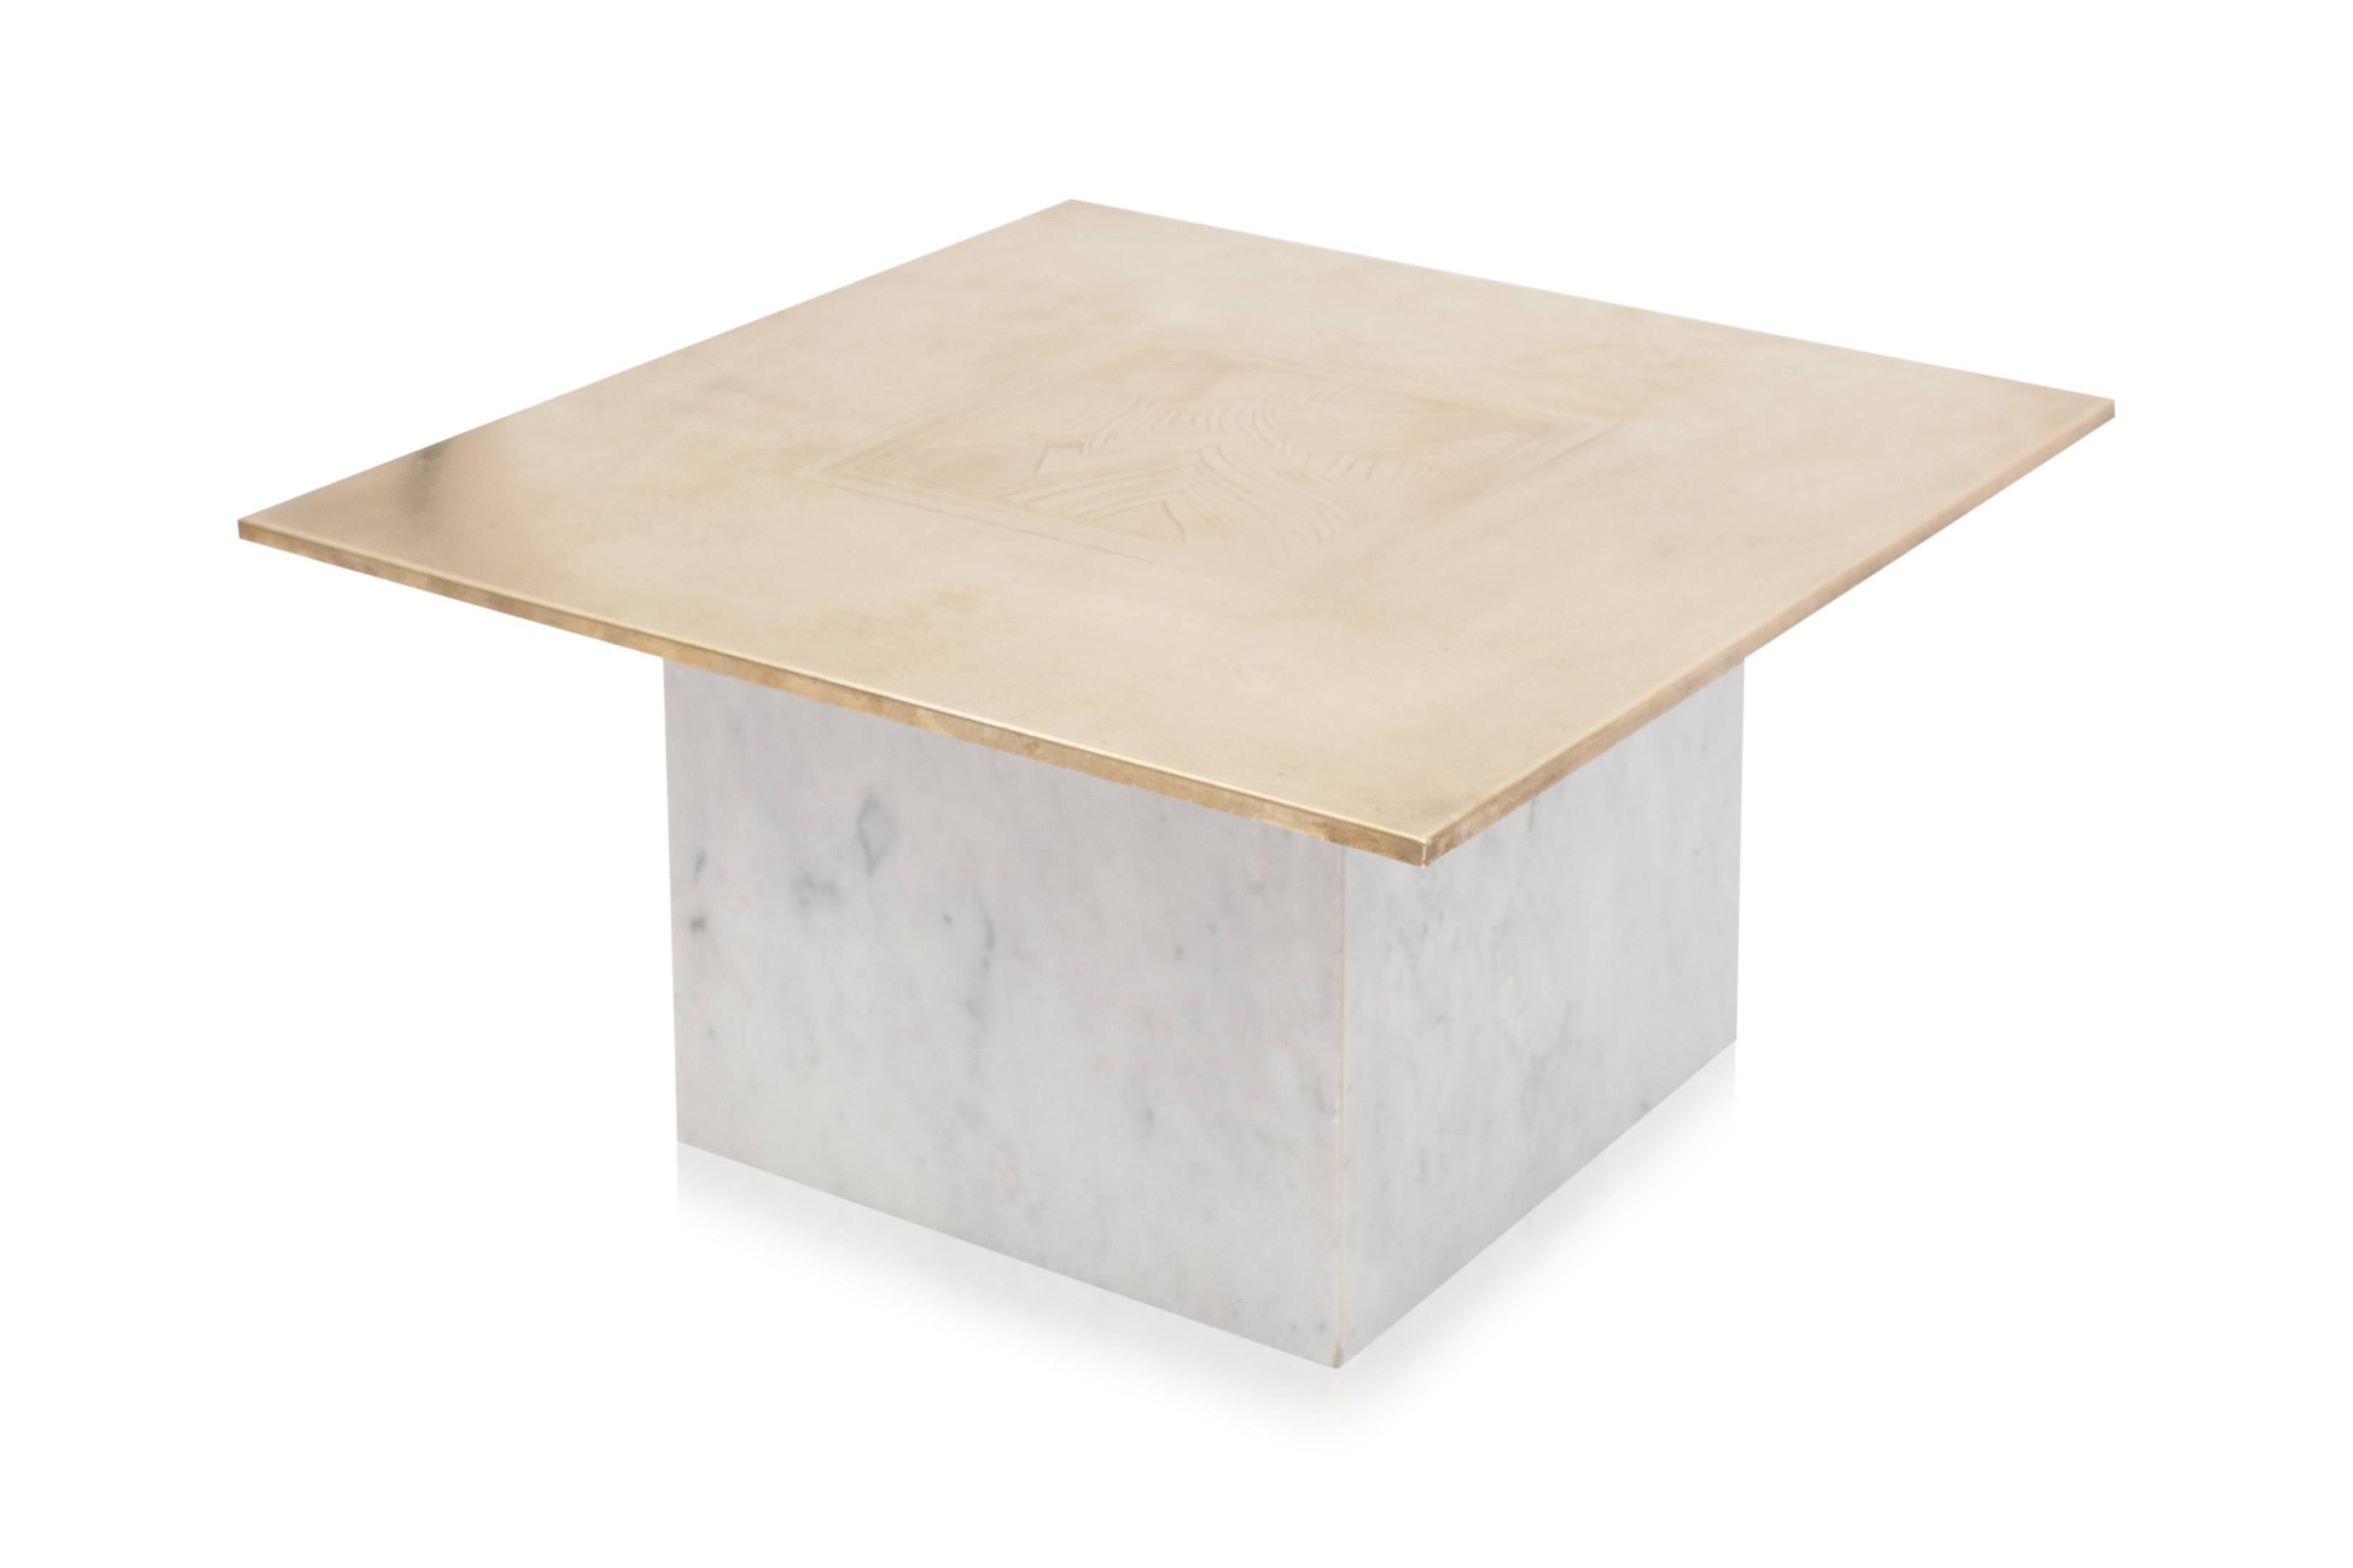 Brass etched side table on white Carrara marble base
signed by the artist in 1979
typical Belgian artwork table in the likes of Heckscher, Matthias, Chale, Lova Creation, etc.
Measures: L 60 cm, D 60 cm, H 40 cm.
   